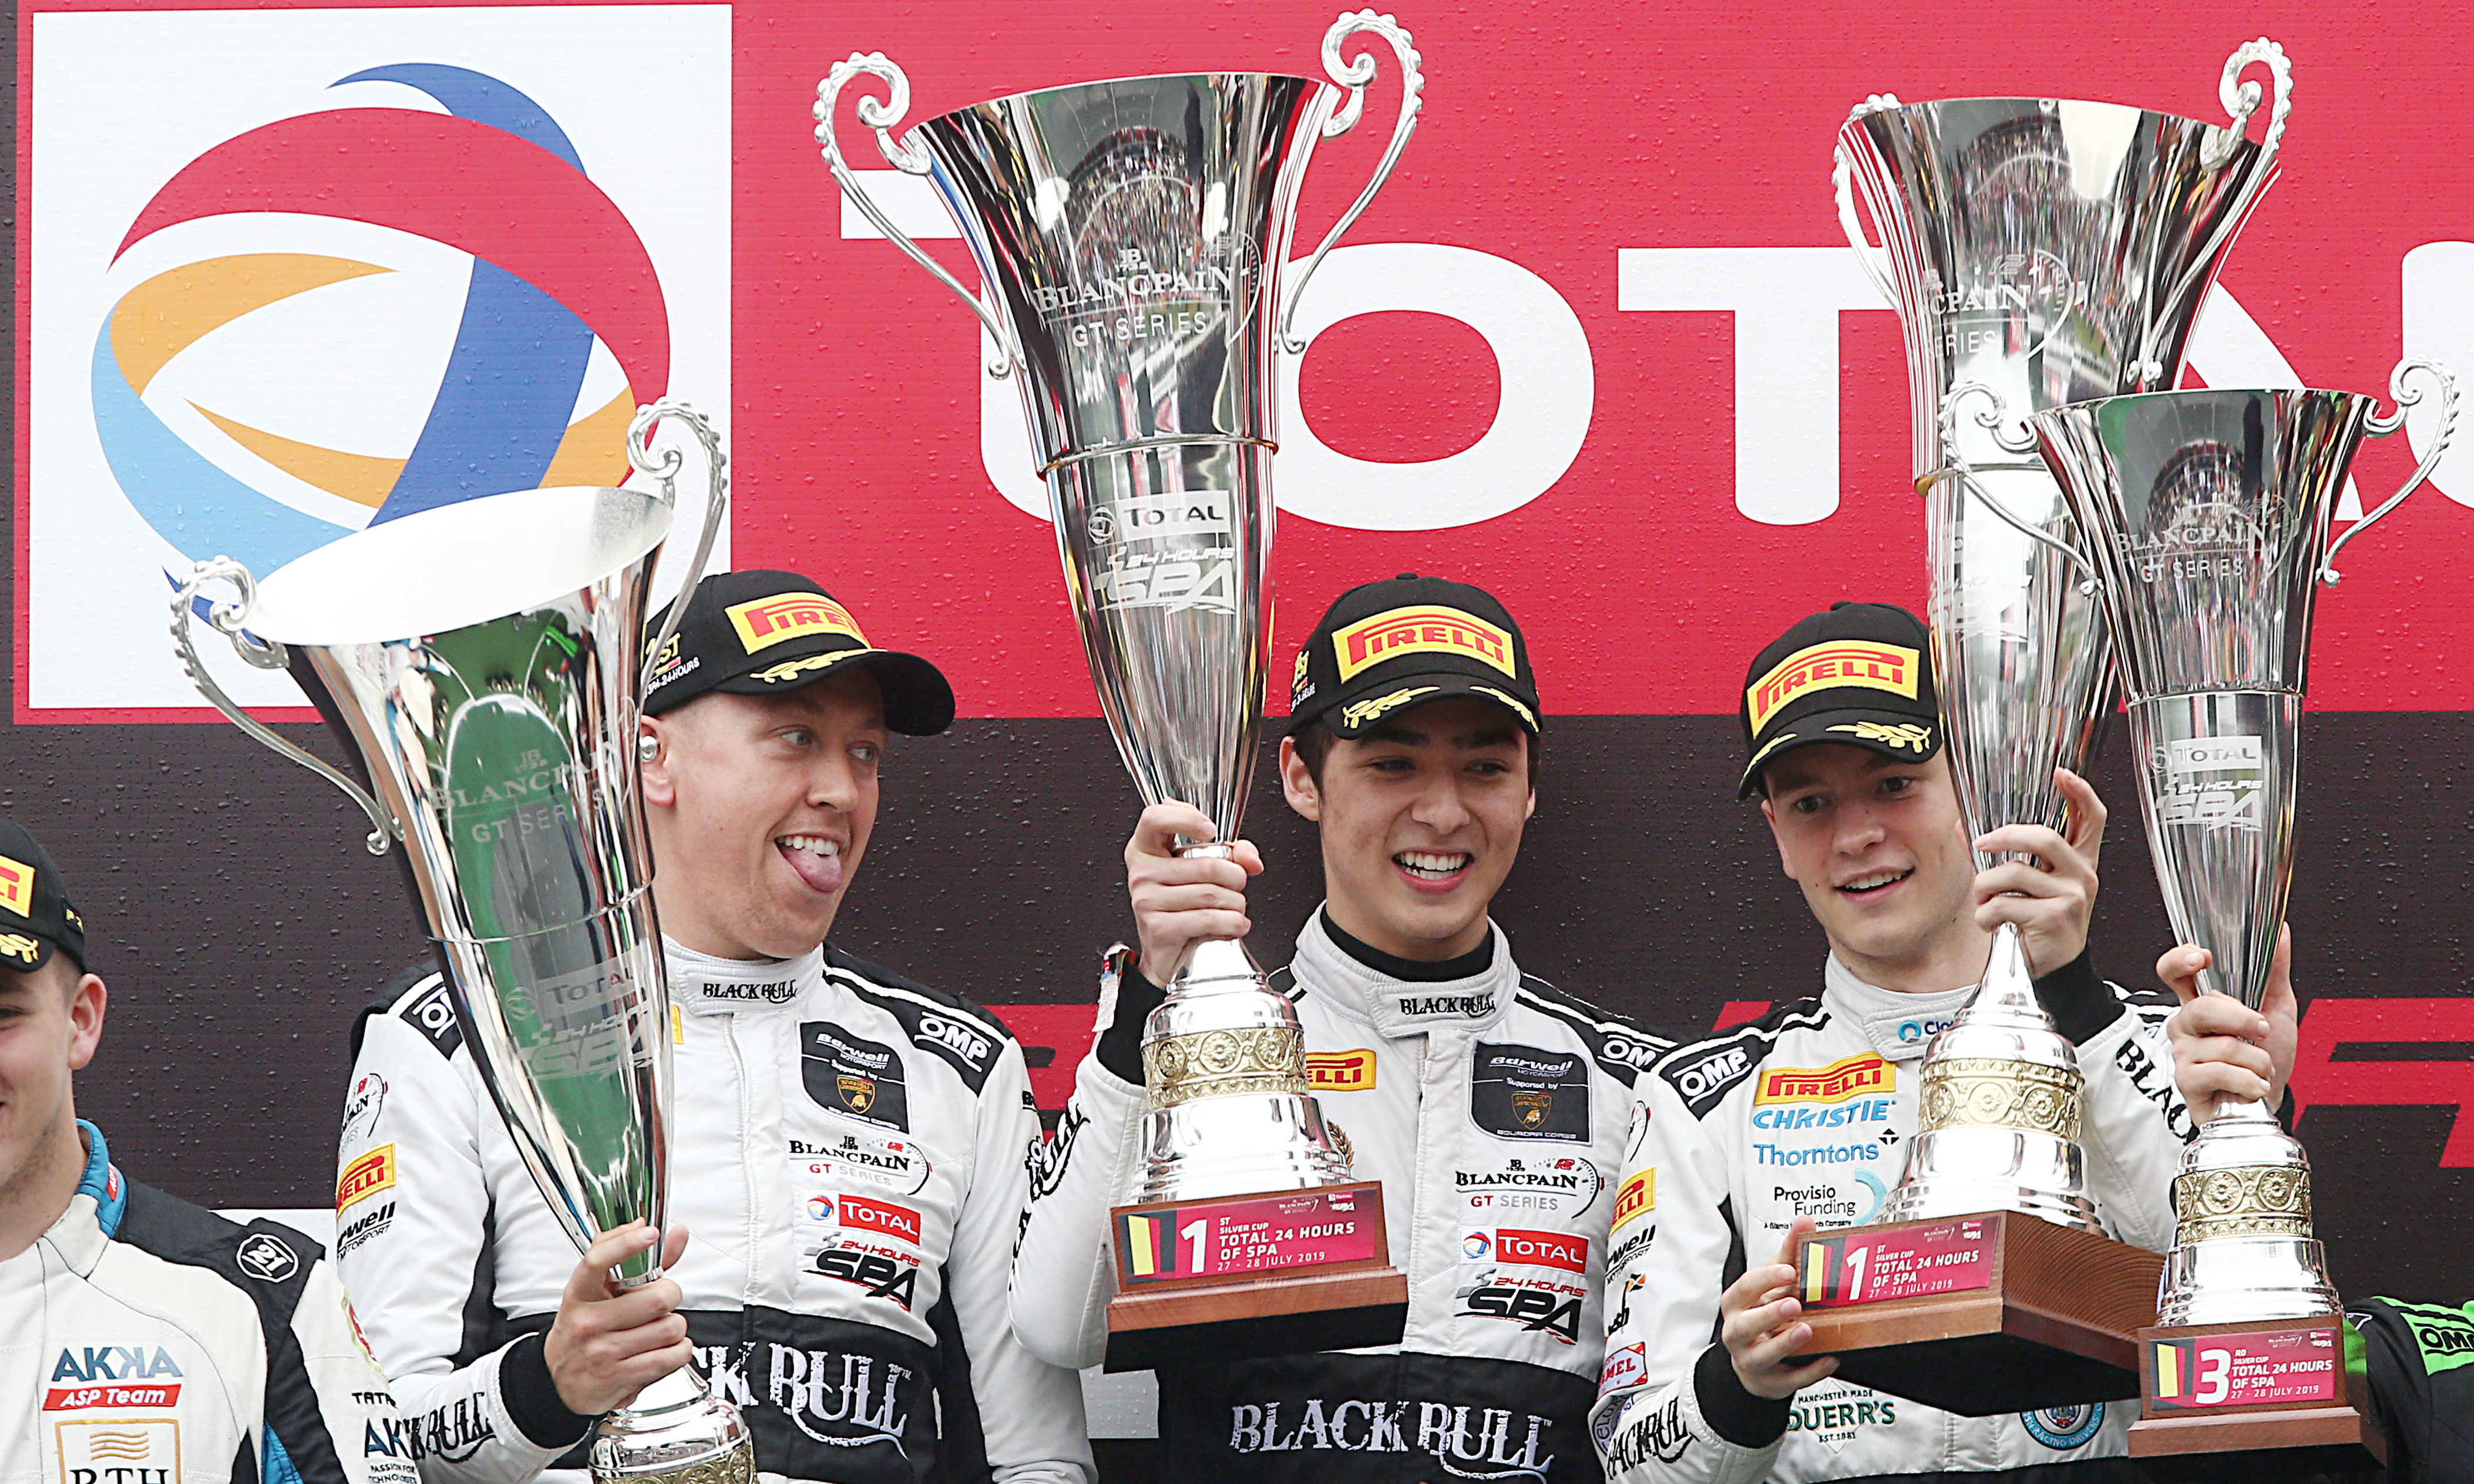 Sandy Mitchell (right) celebrates victory on the Spa podium in 2019.